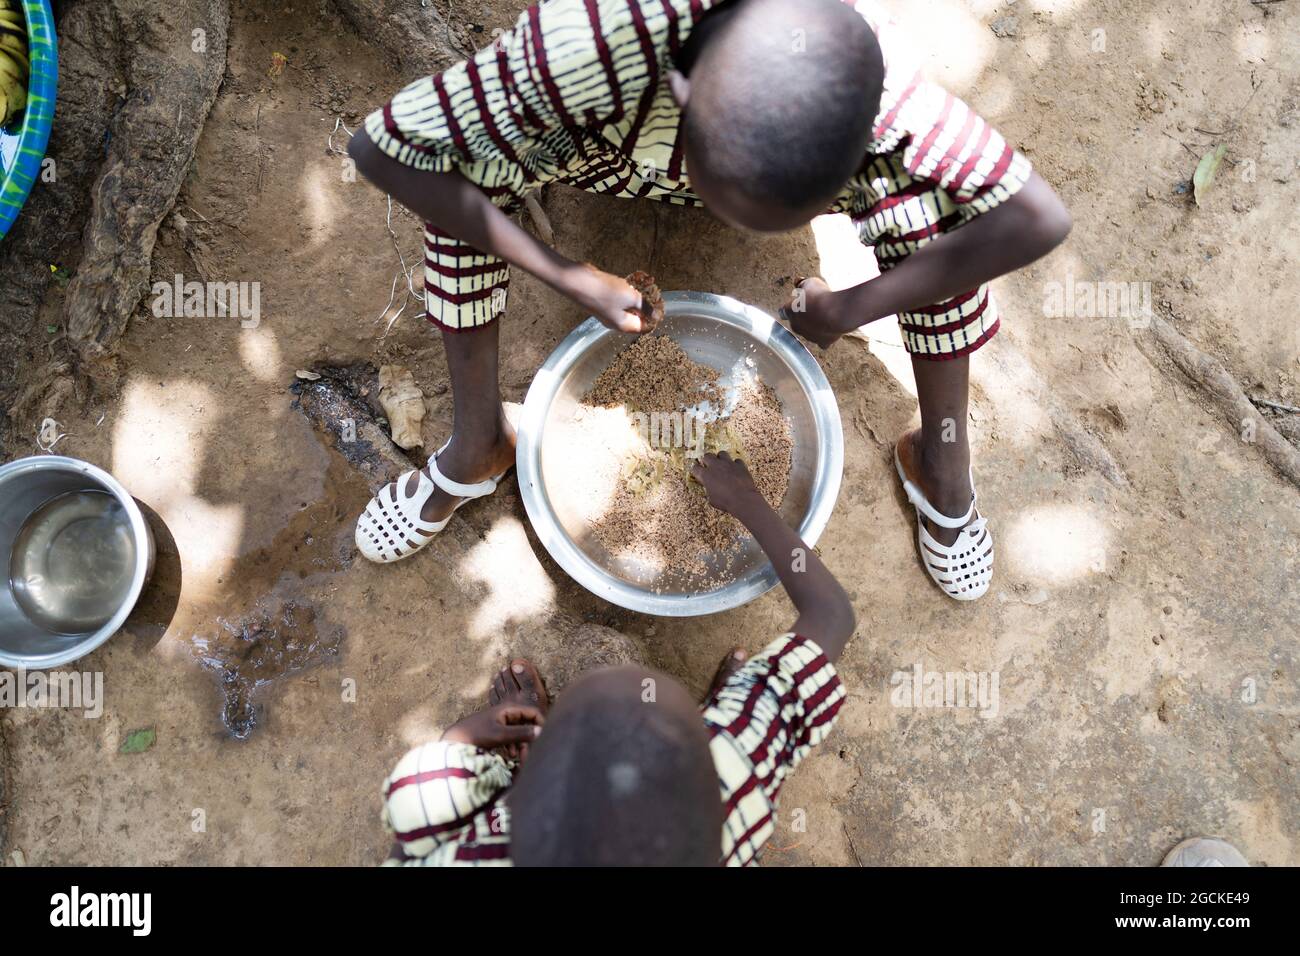 In this image two small black African brothers in identical clothes are sharing a meat-free plate of rice, sitting on the ground, with their right han Stock Photo